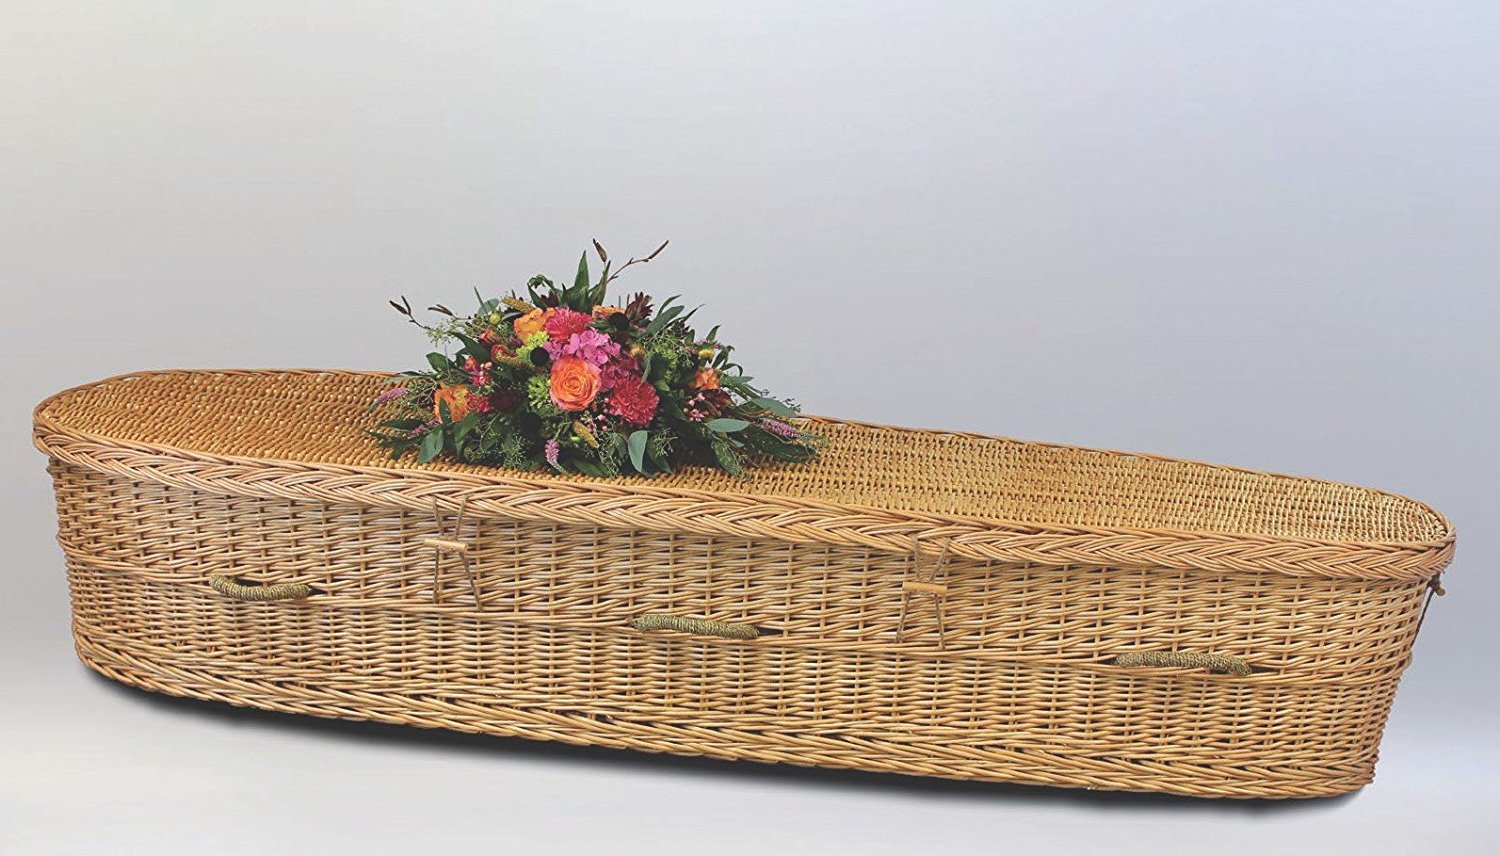 Willow biodegradable coffin